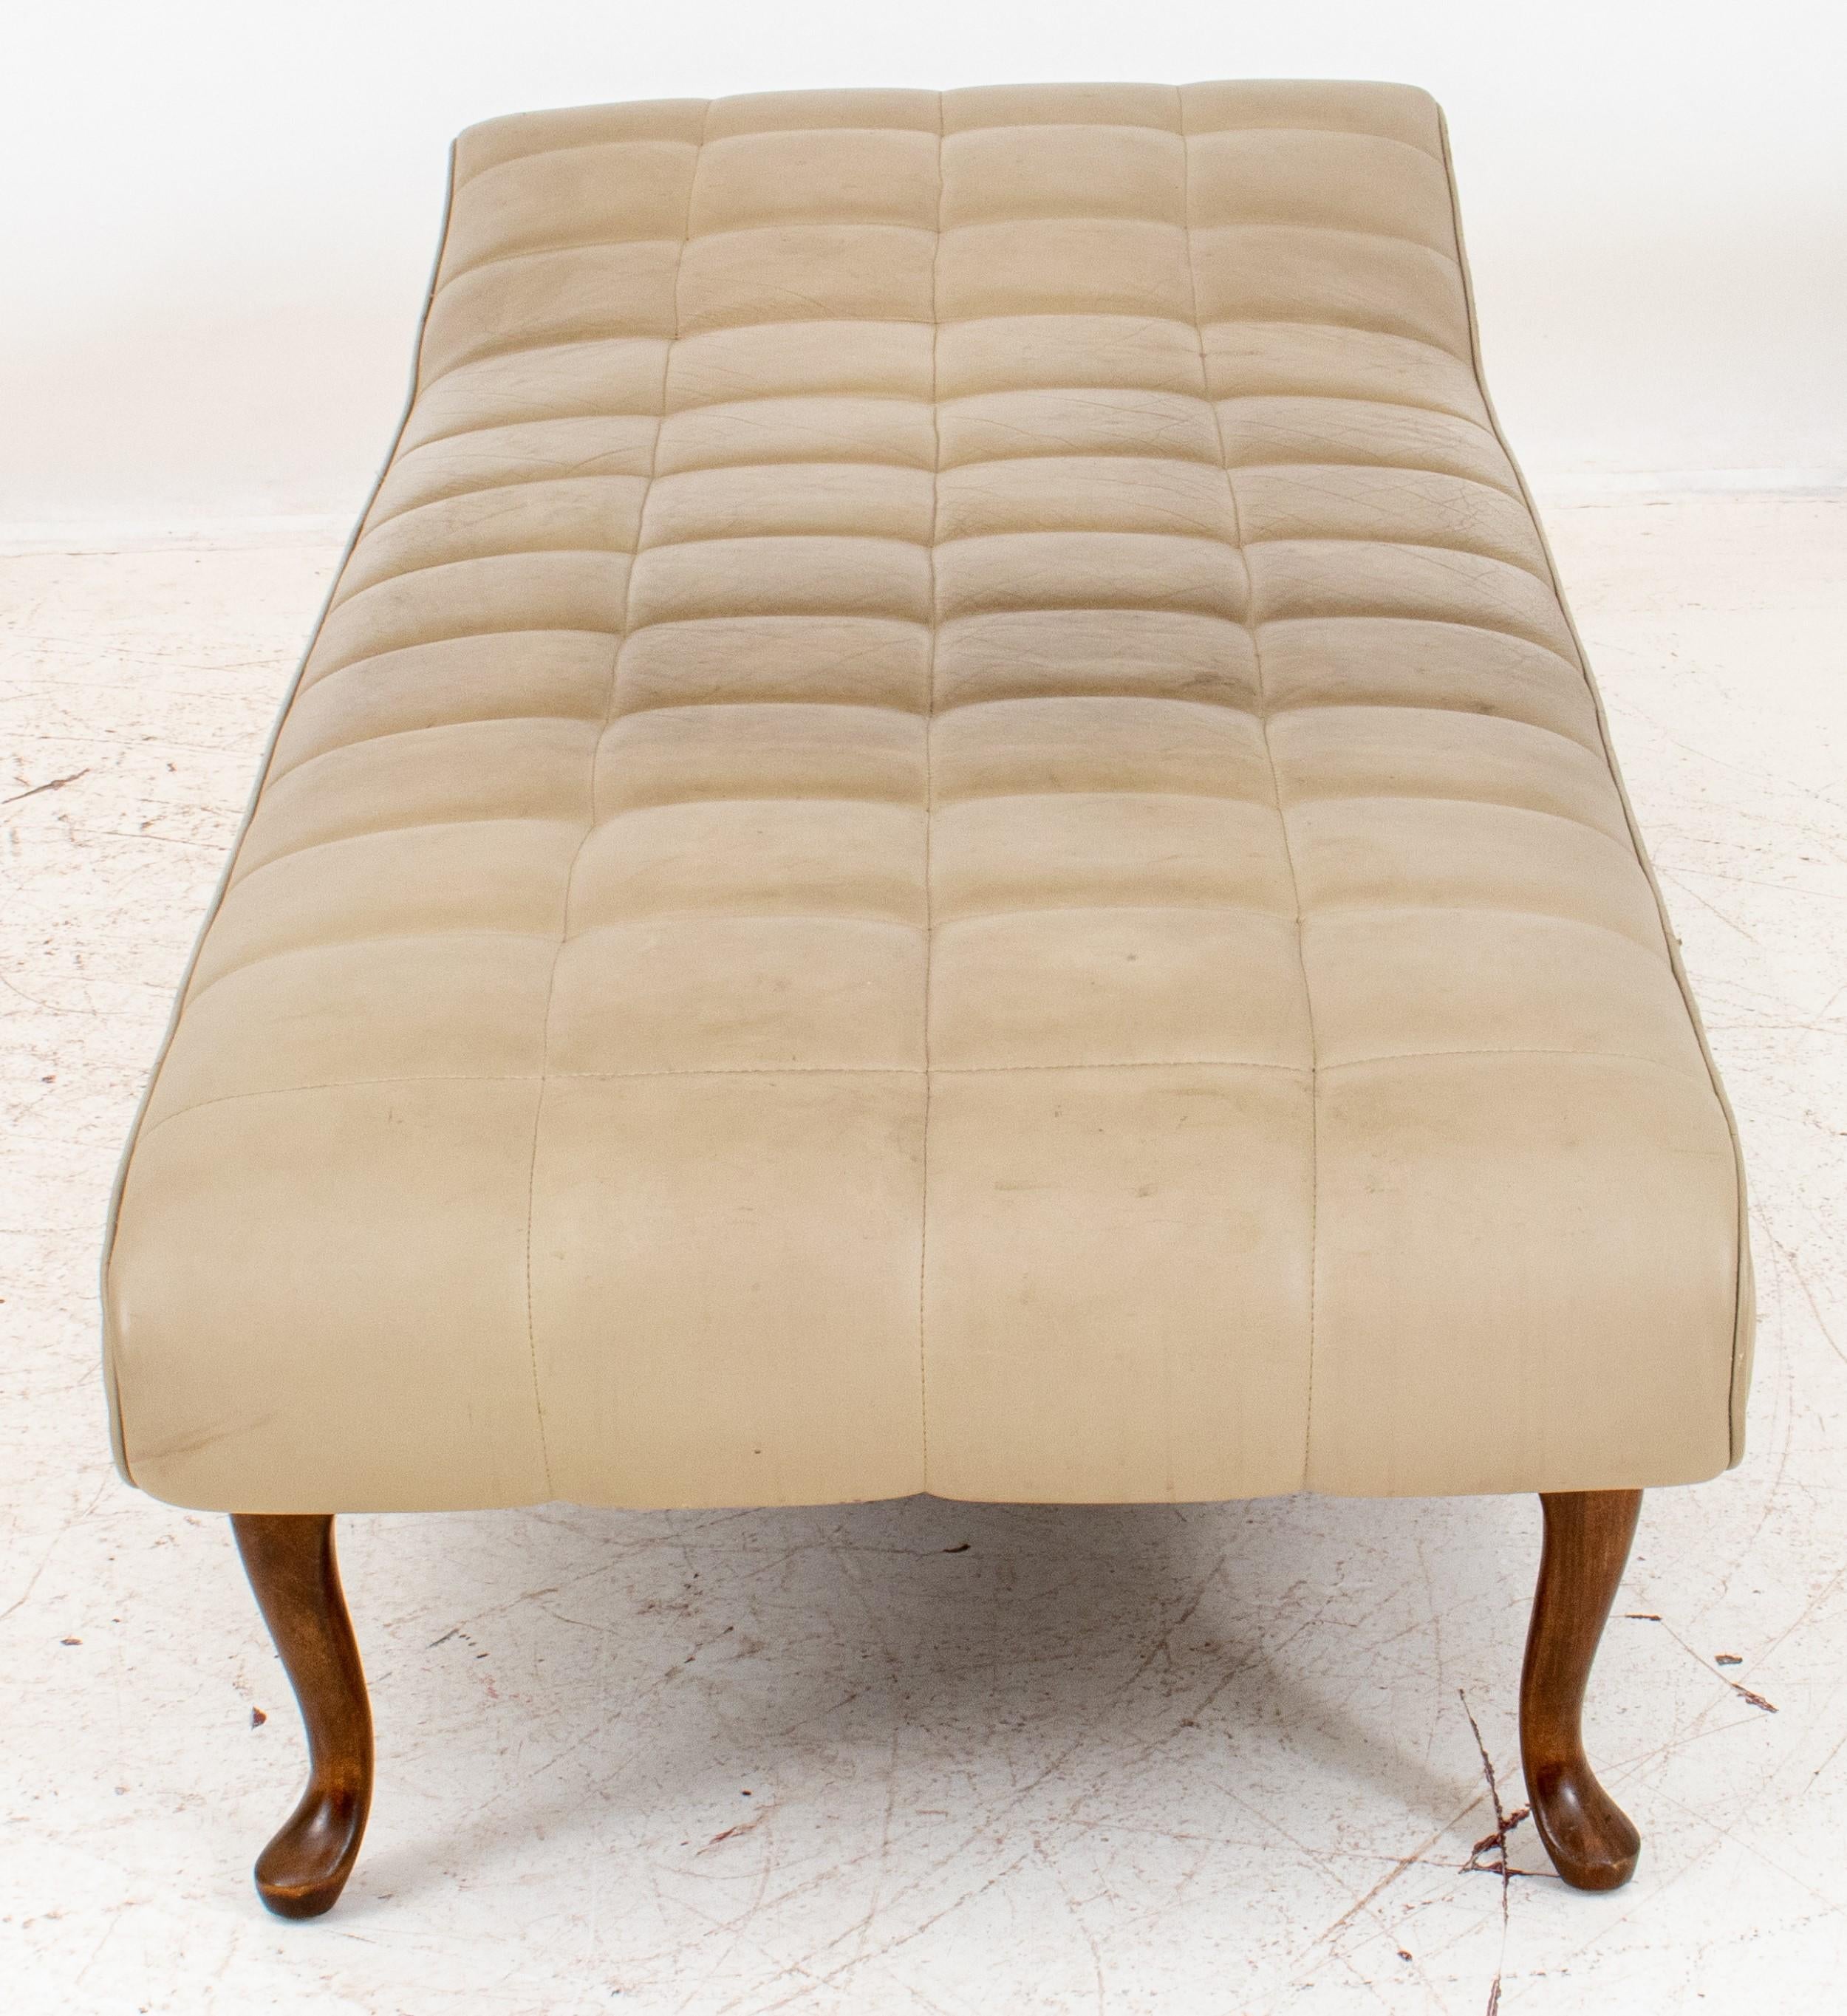 Upholstered Tufted Chaise Lounge Couch In Good Condition For Sale In New York, NY